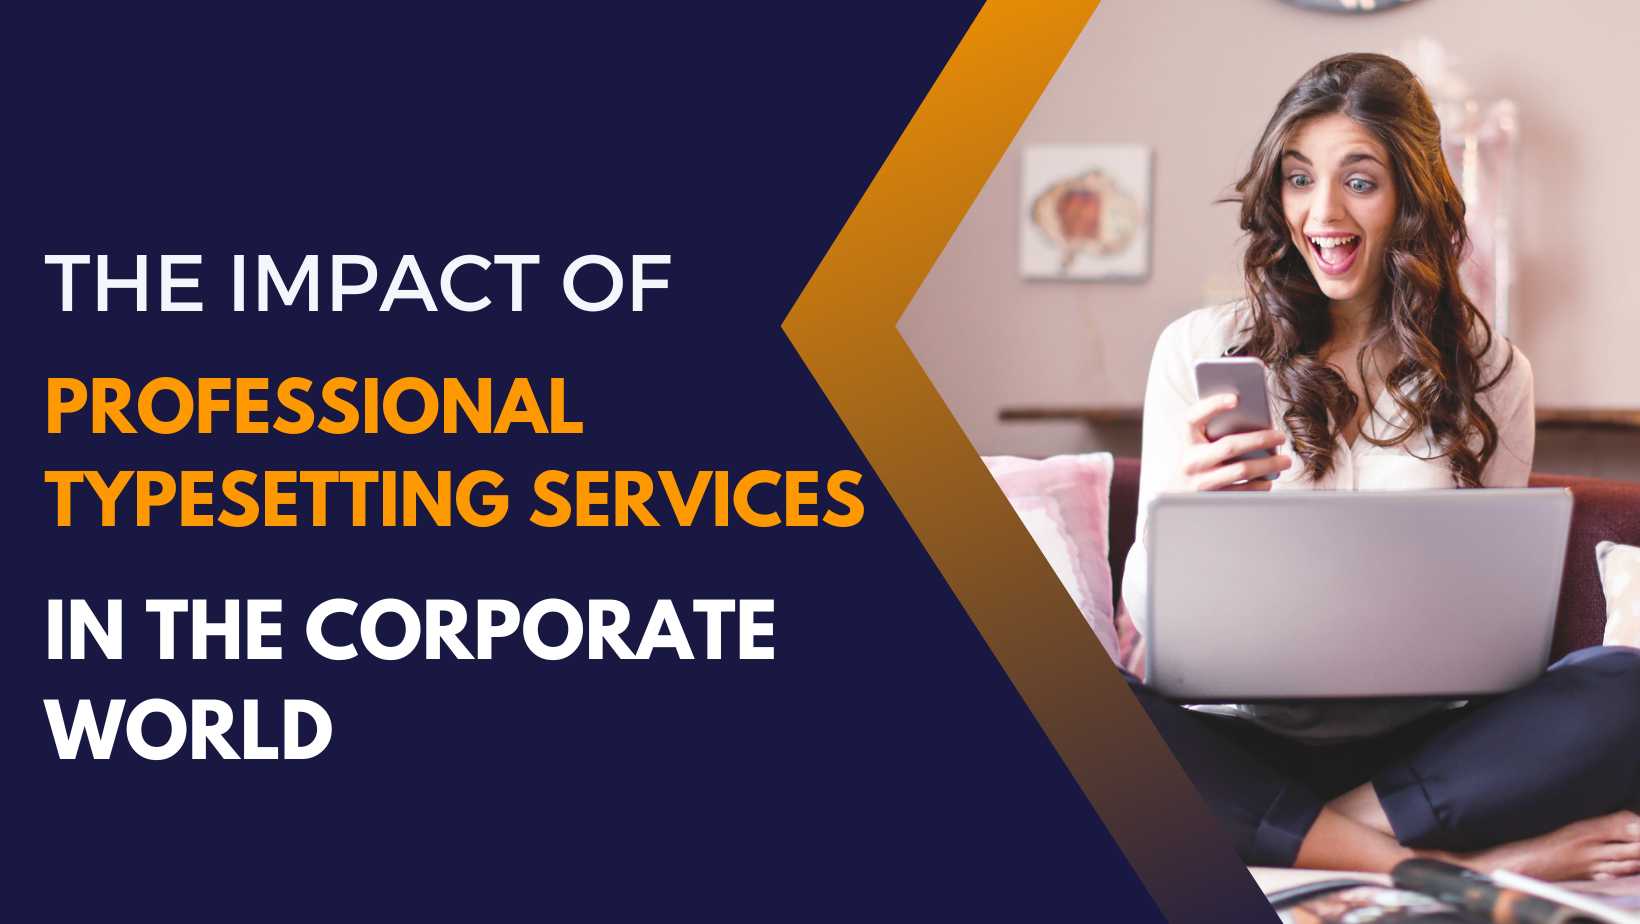 The Impact Of Professional Typesetting Services In The Corporate World